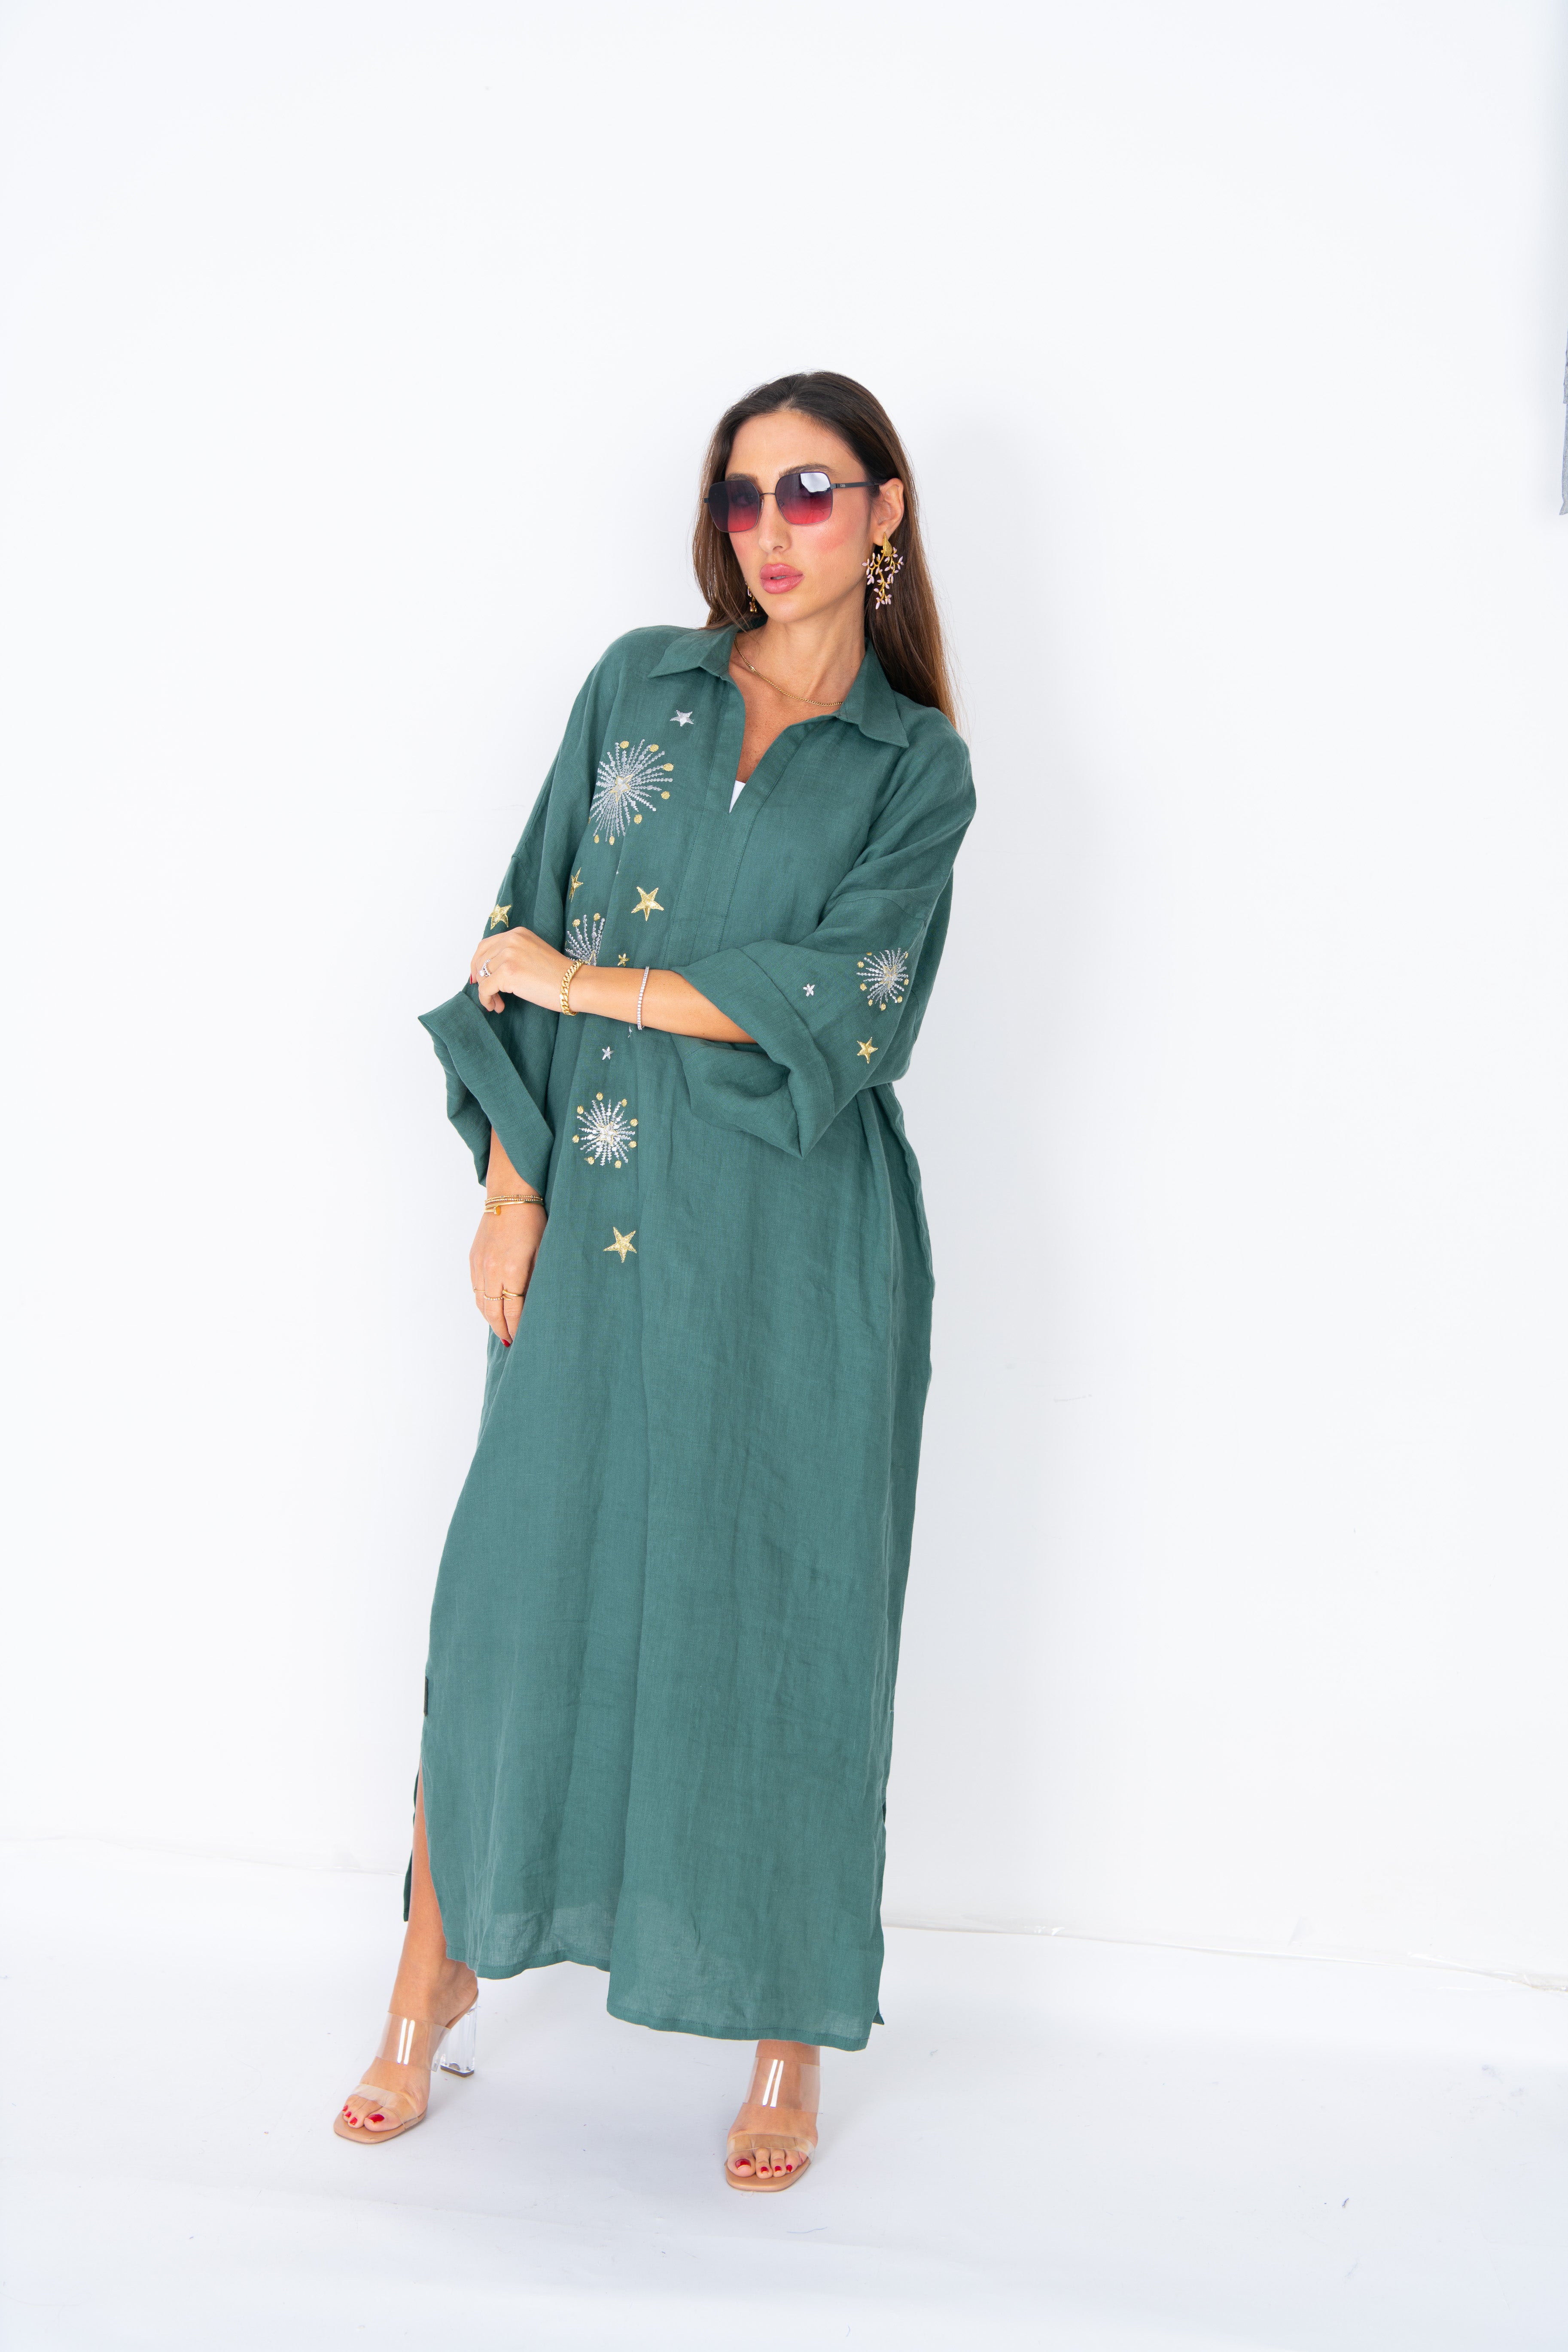 Chic Green Abaya with Golden Starburst Embroidery – Celestial Elegance